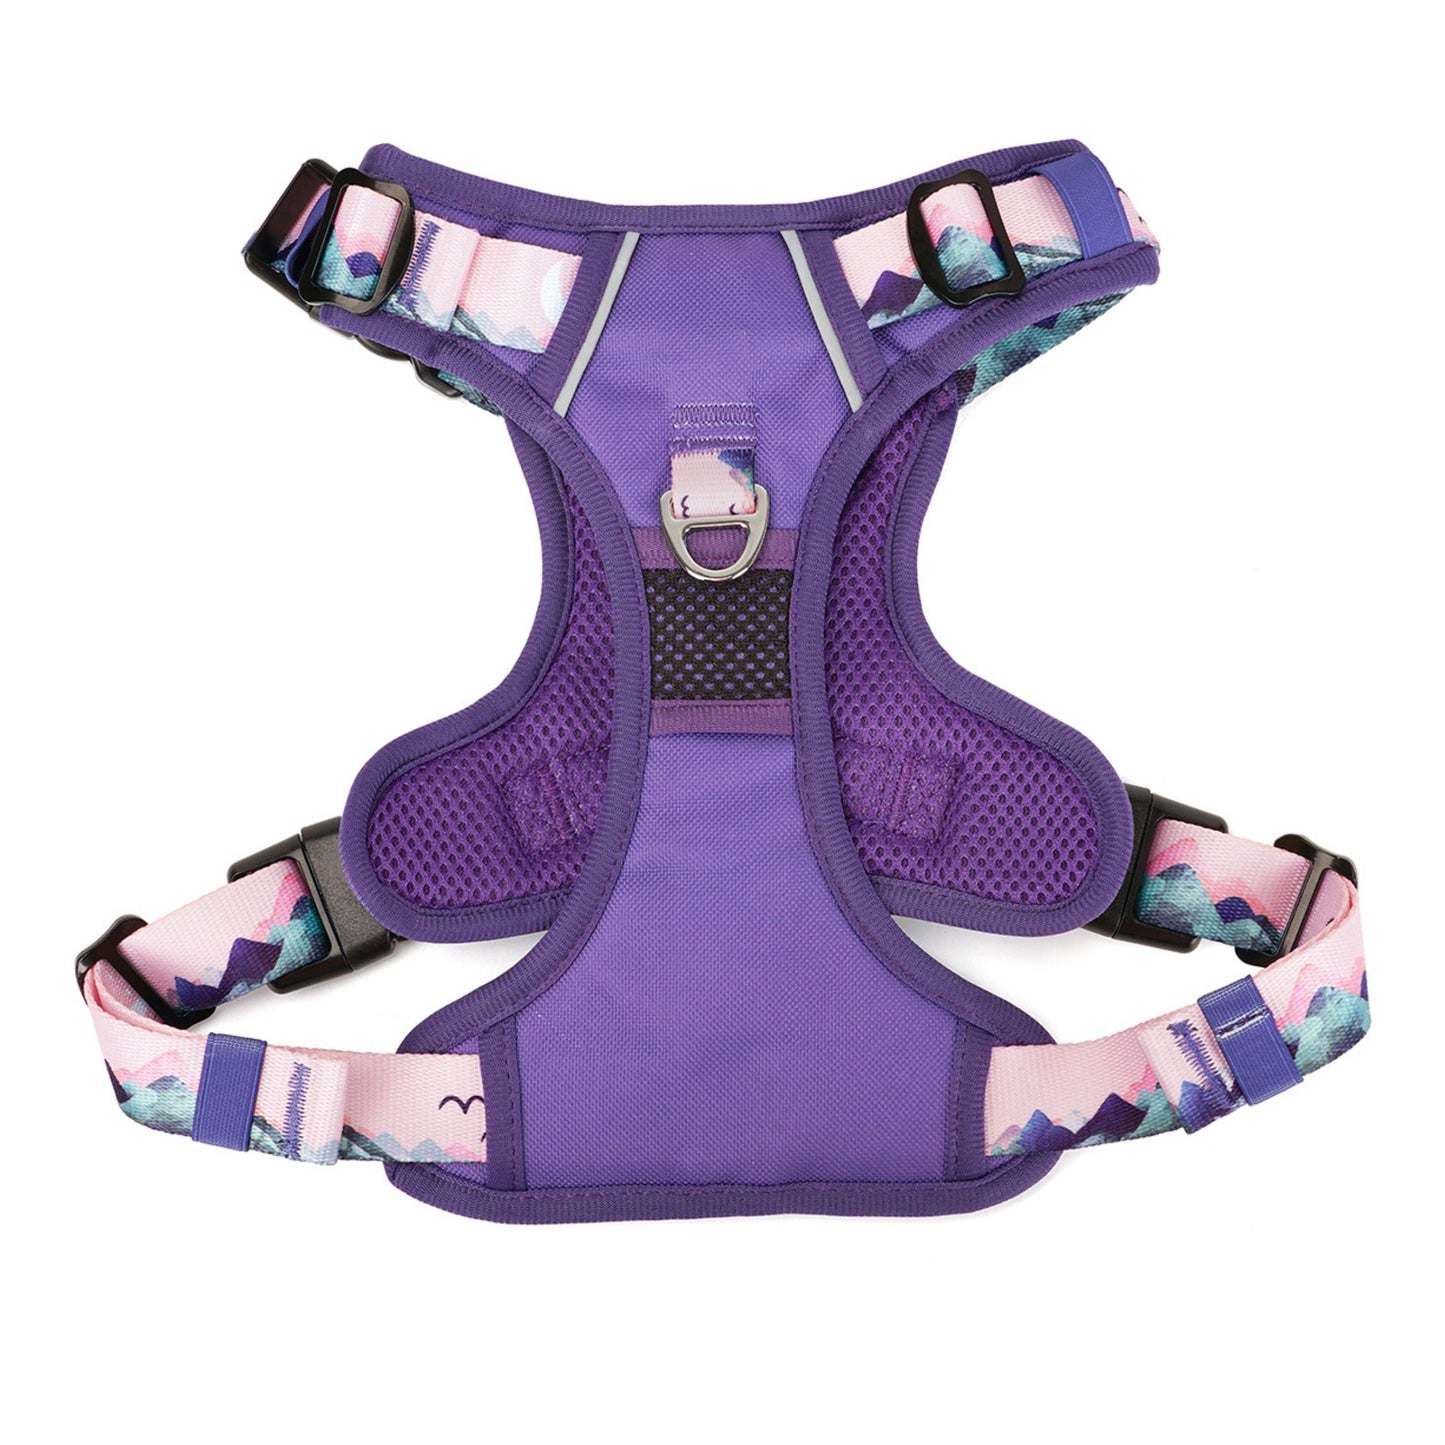 NEW! Mt. Milly Click N' Go Harness LP